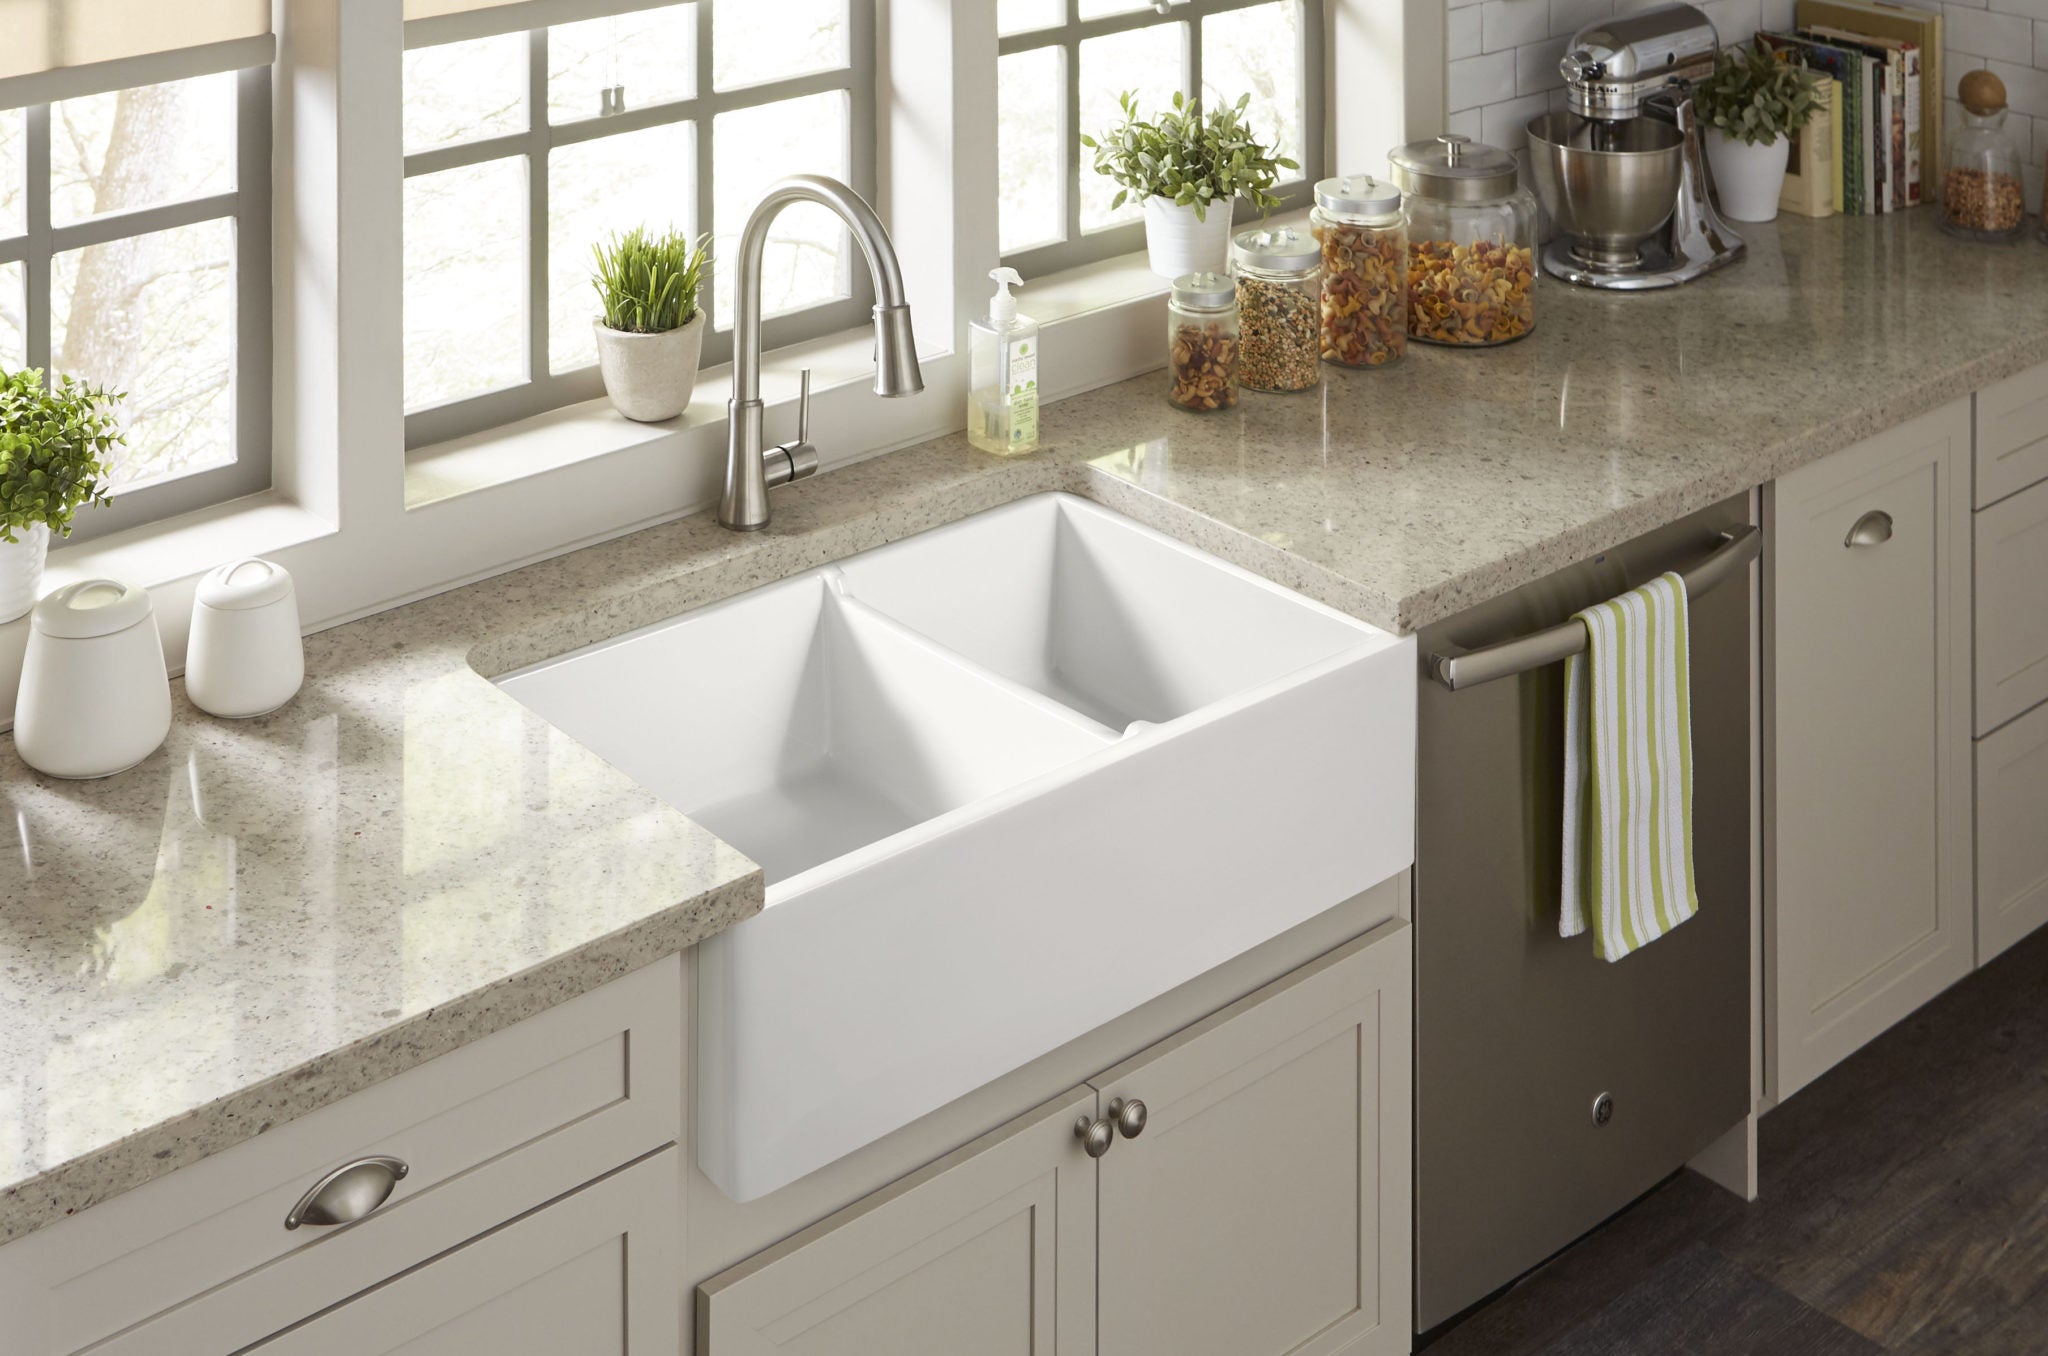 Why You Don’t Need To Buy A New Sink